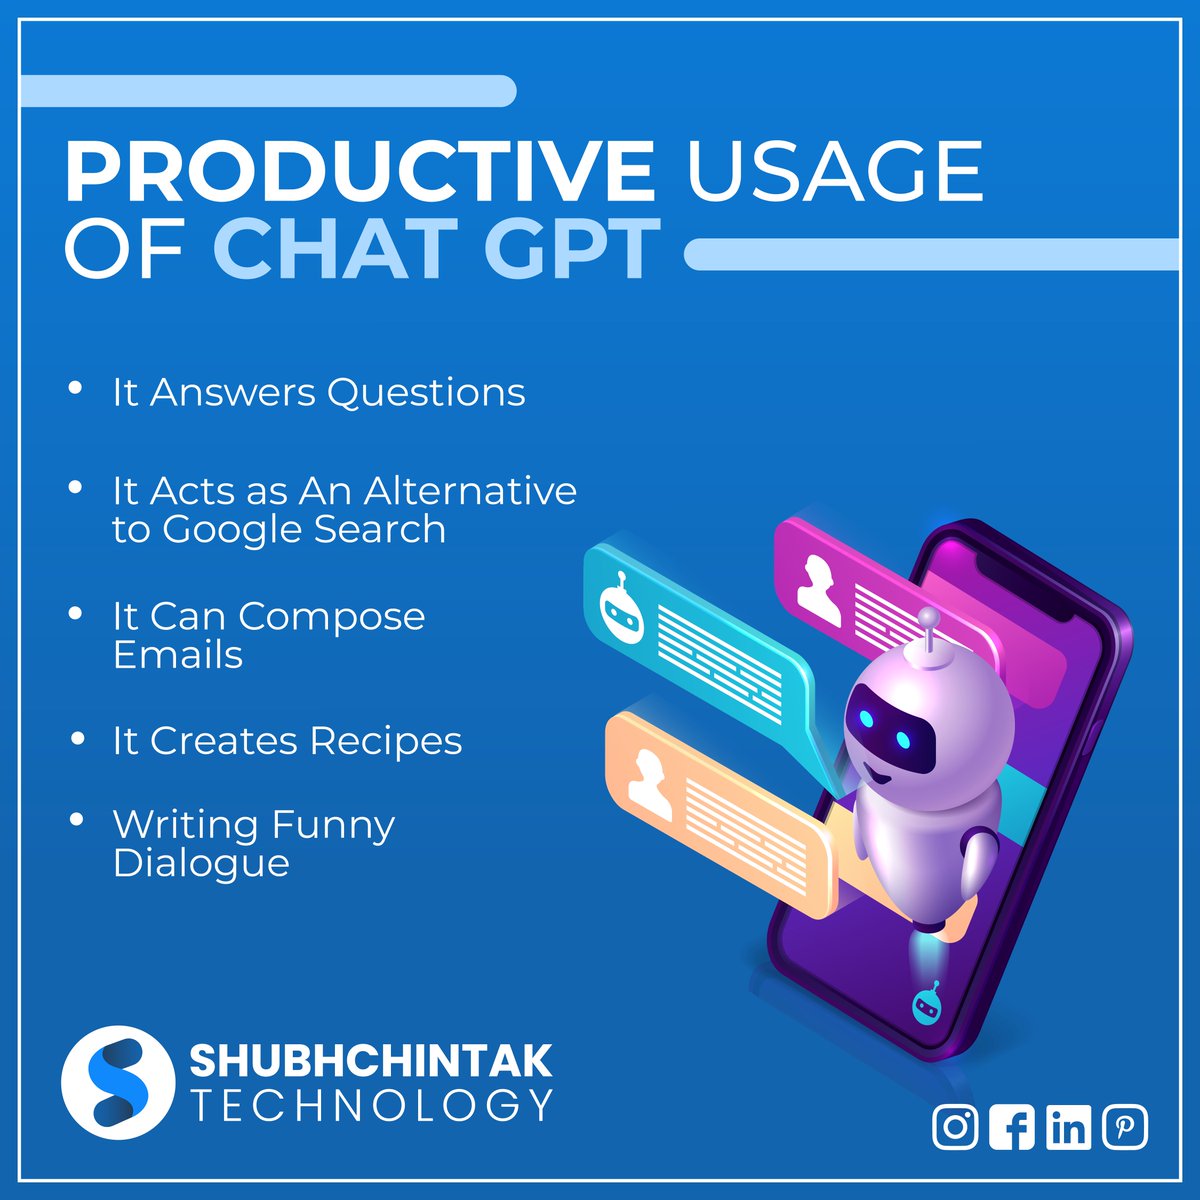 ChatGPT is quite popular nowadays, do you know how to get the Right Results from it?

Read article shared below to know it can make your life easy!
analyticsinsight.net/top-10-product… 

#Chatgpt #AI #technologyrends2023 #startups #smbs #technology #analyticsinsights